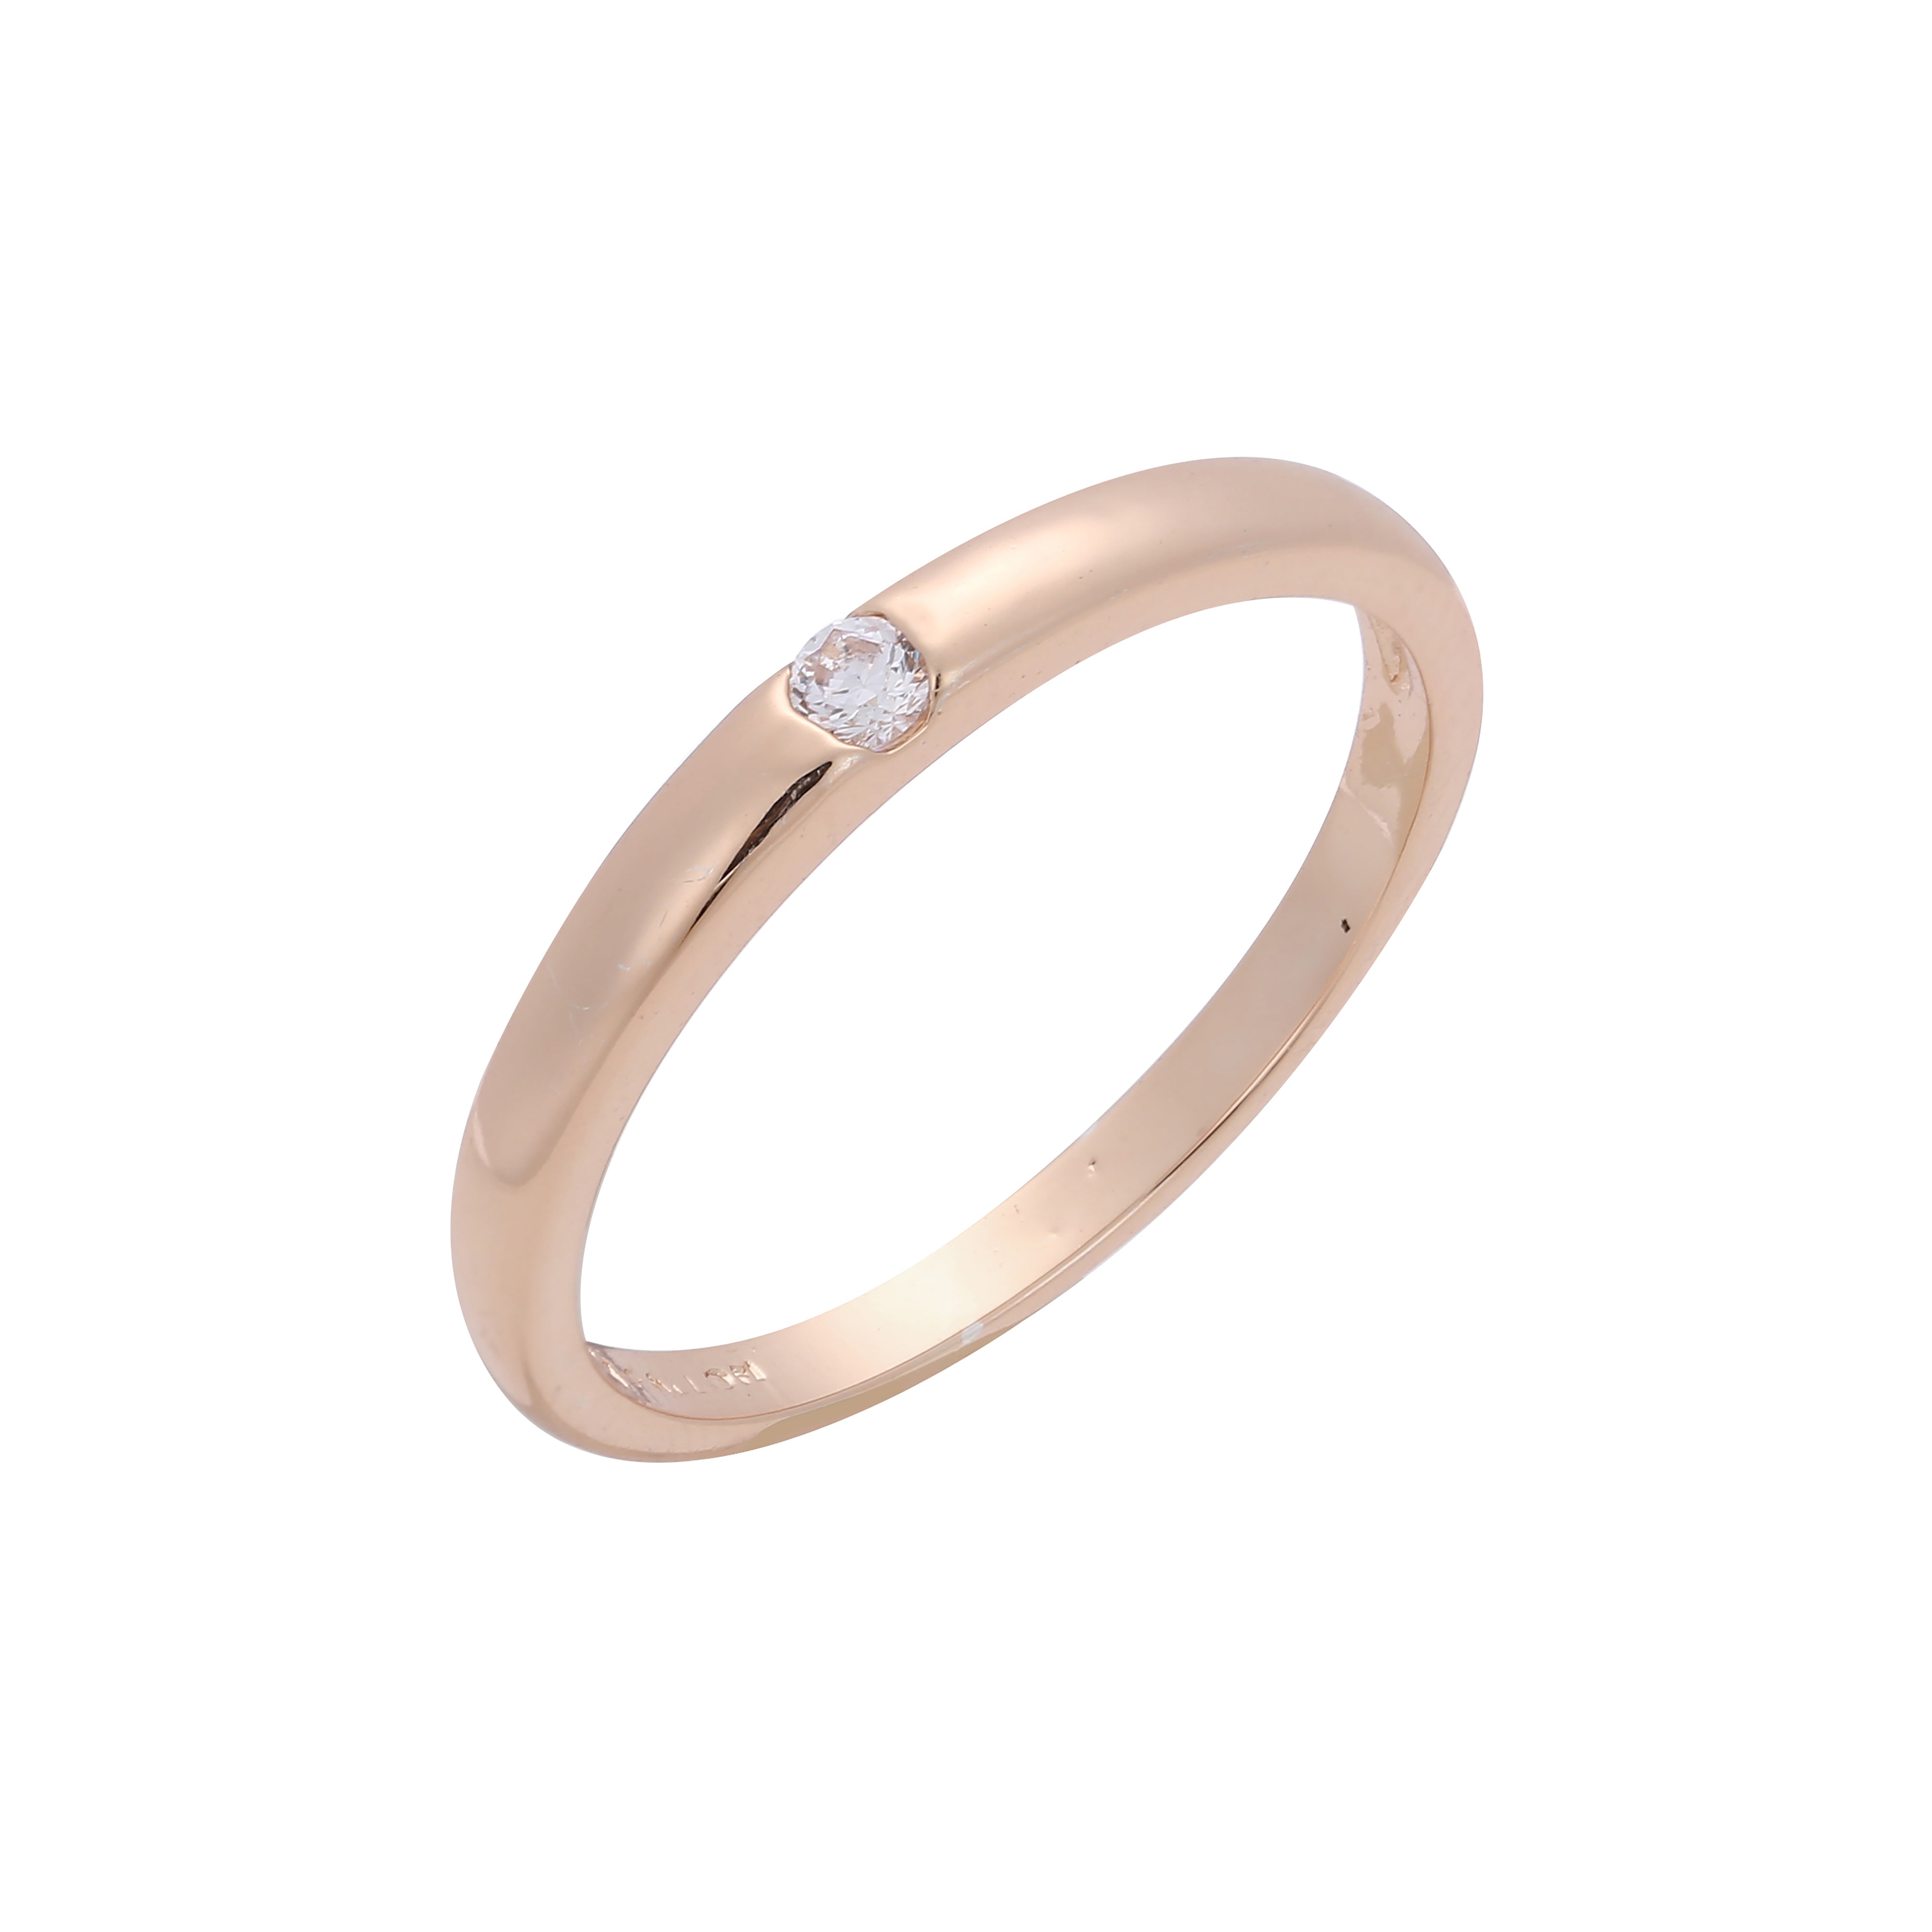 Solitaire tension rings of explicit simplicity in White Gold, 14K Gold, Rose Gold plating colors